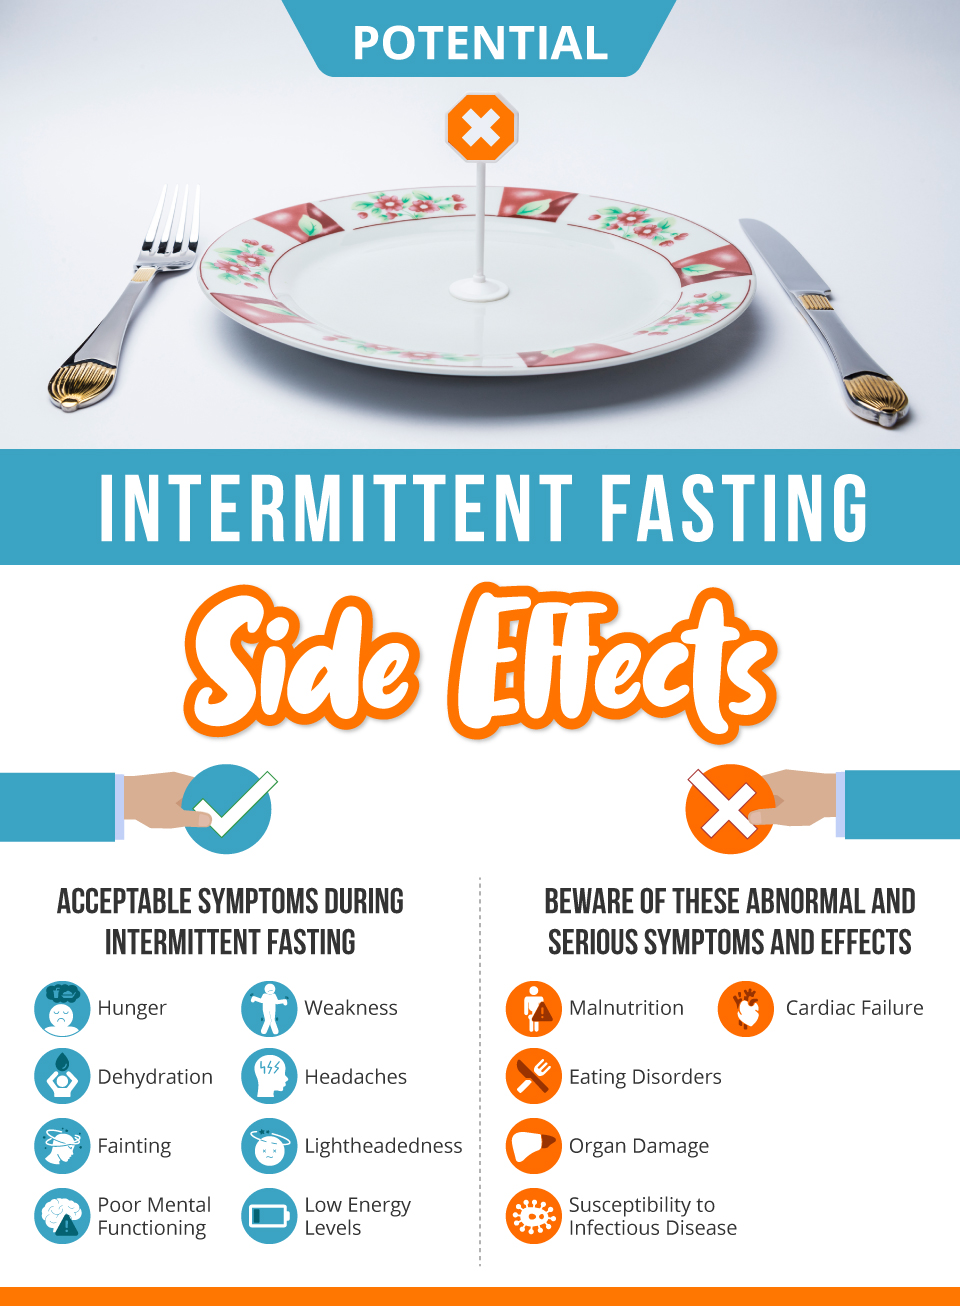 Potential Intermittent Fasting Side Effects